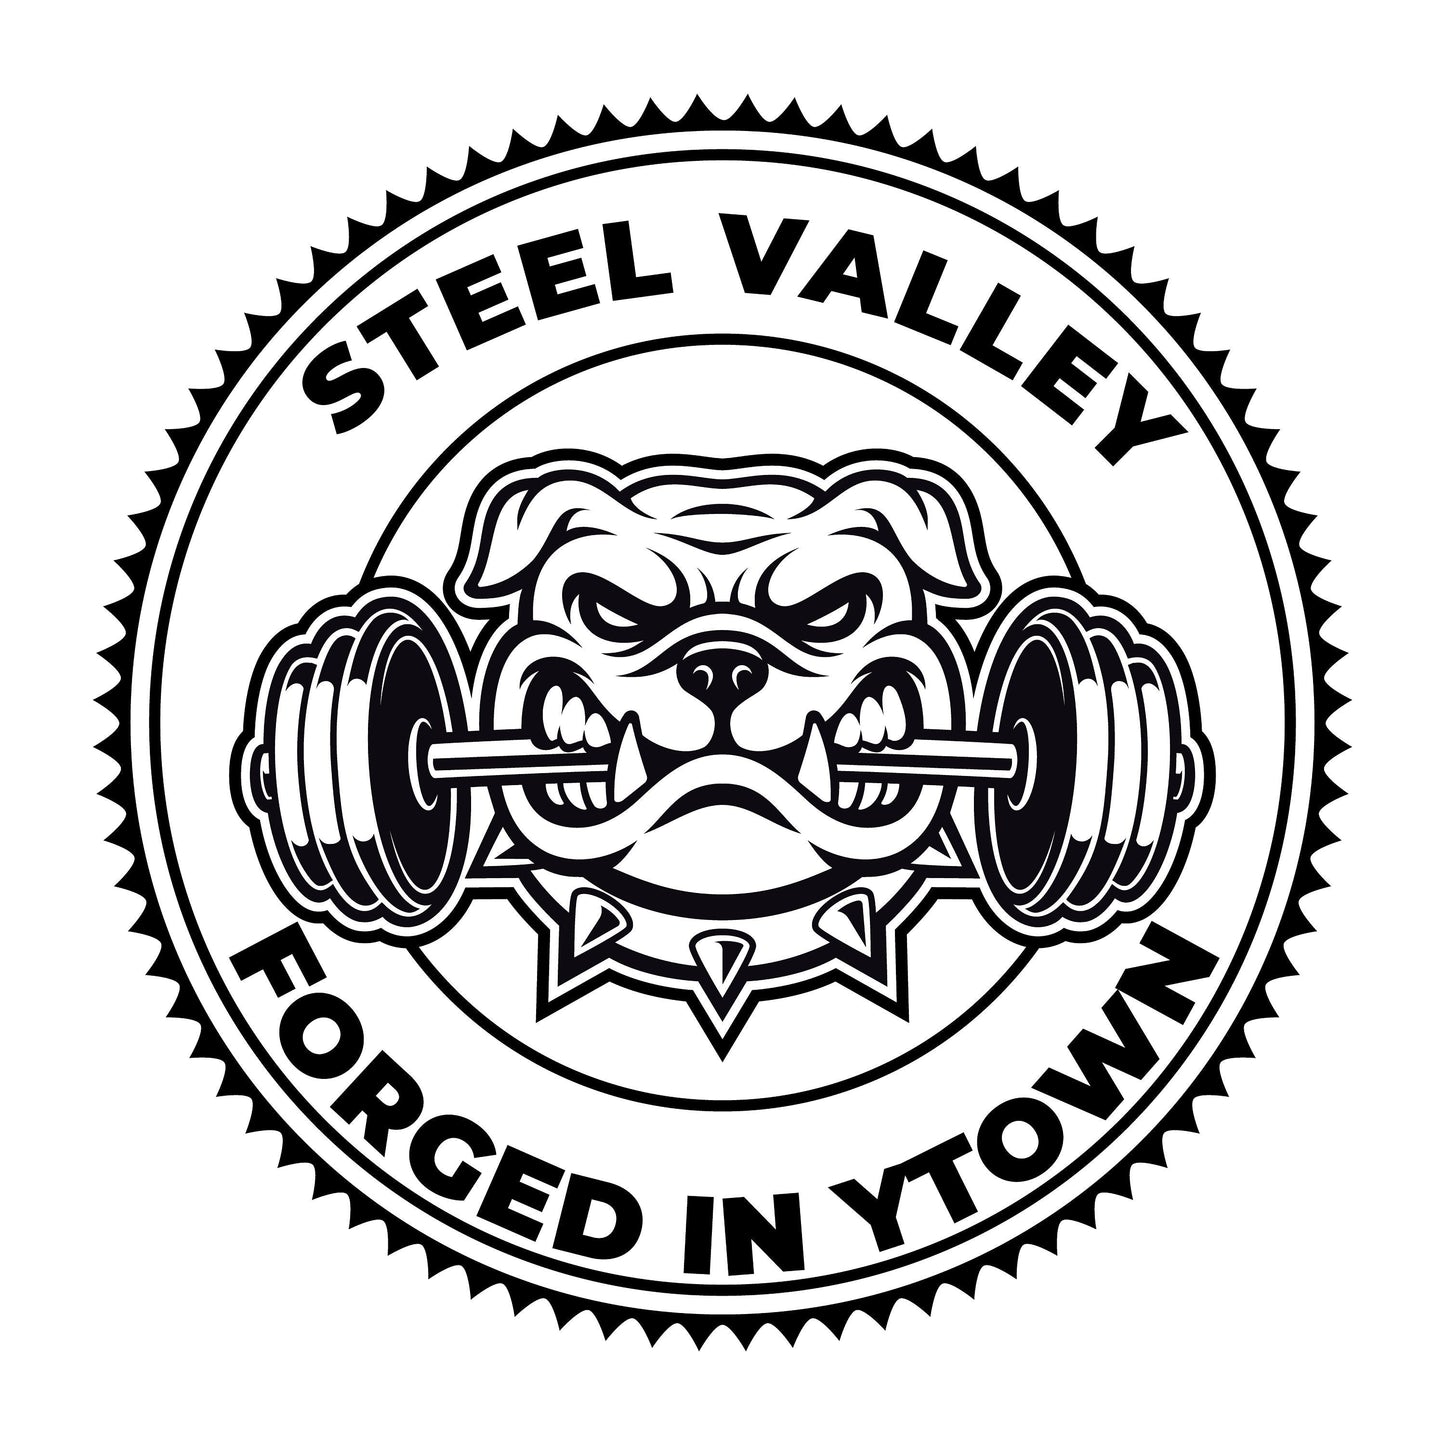 T-Shirt Steel Valley Forged in YTown Hometown Pride Custom Shirt & Ink Color, Shirts and Tees, T-Shirt, Tees for Men, Women, and Children